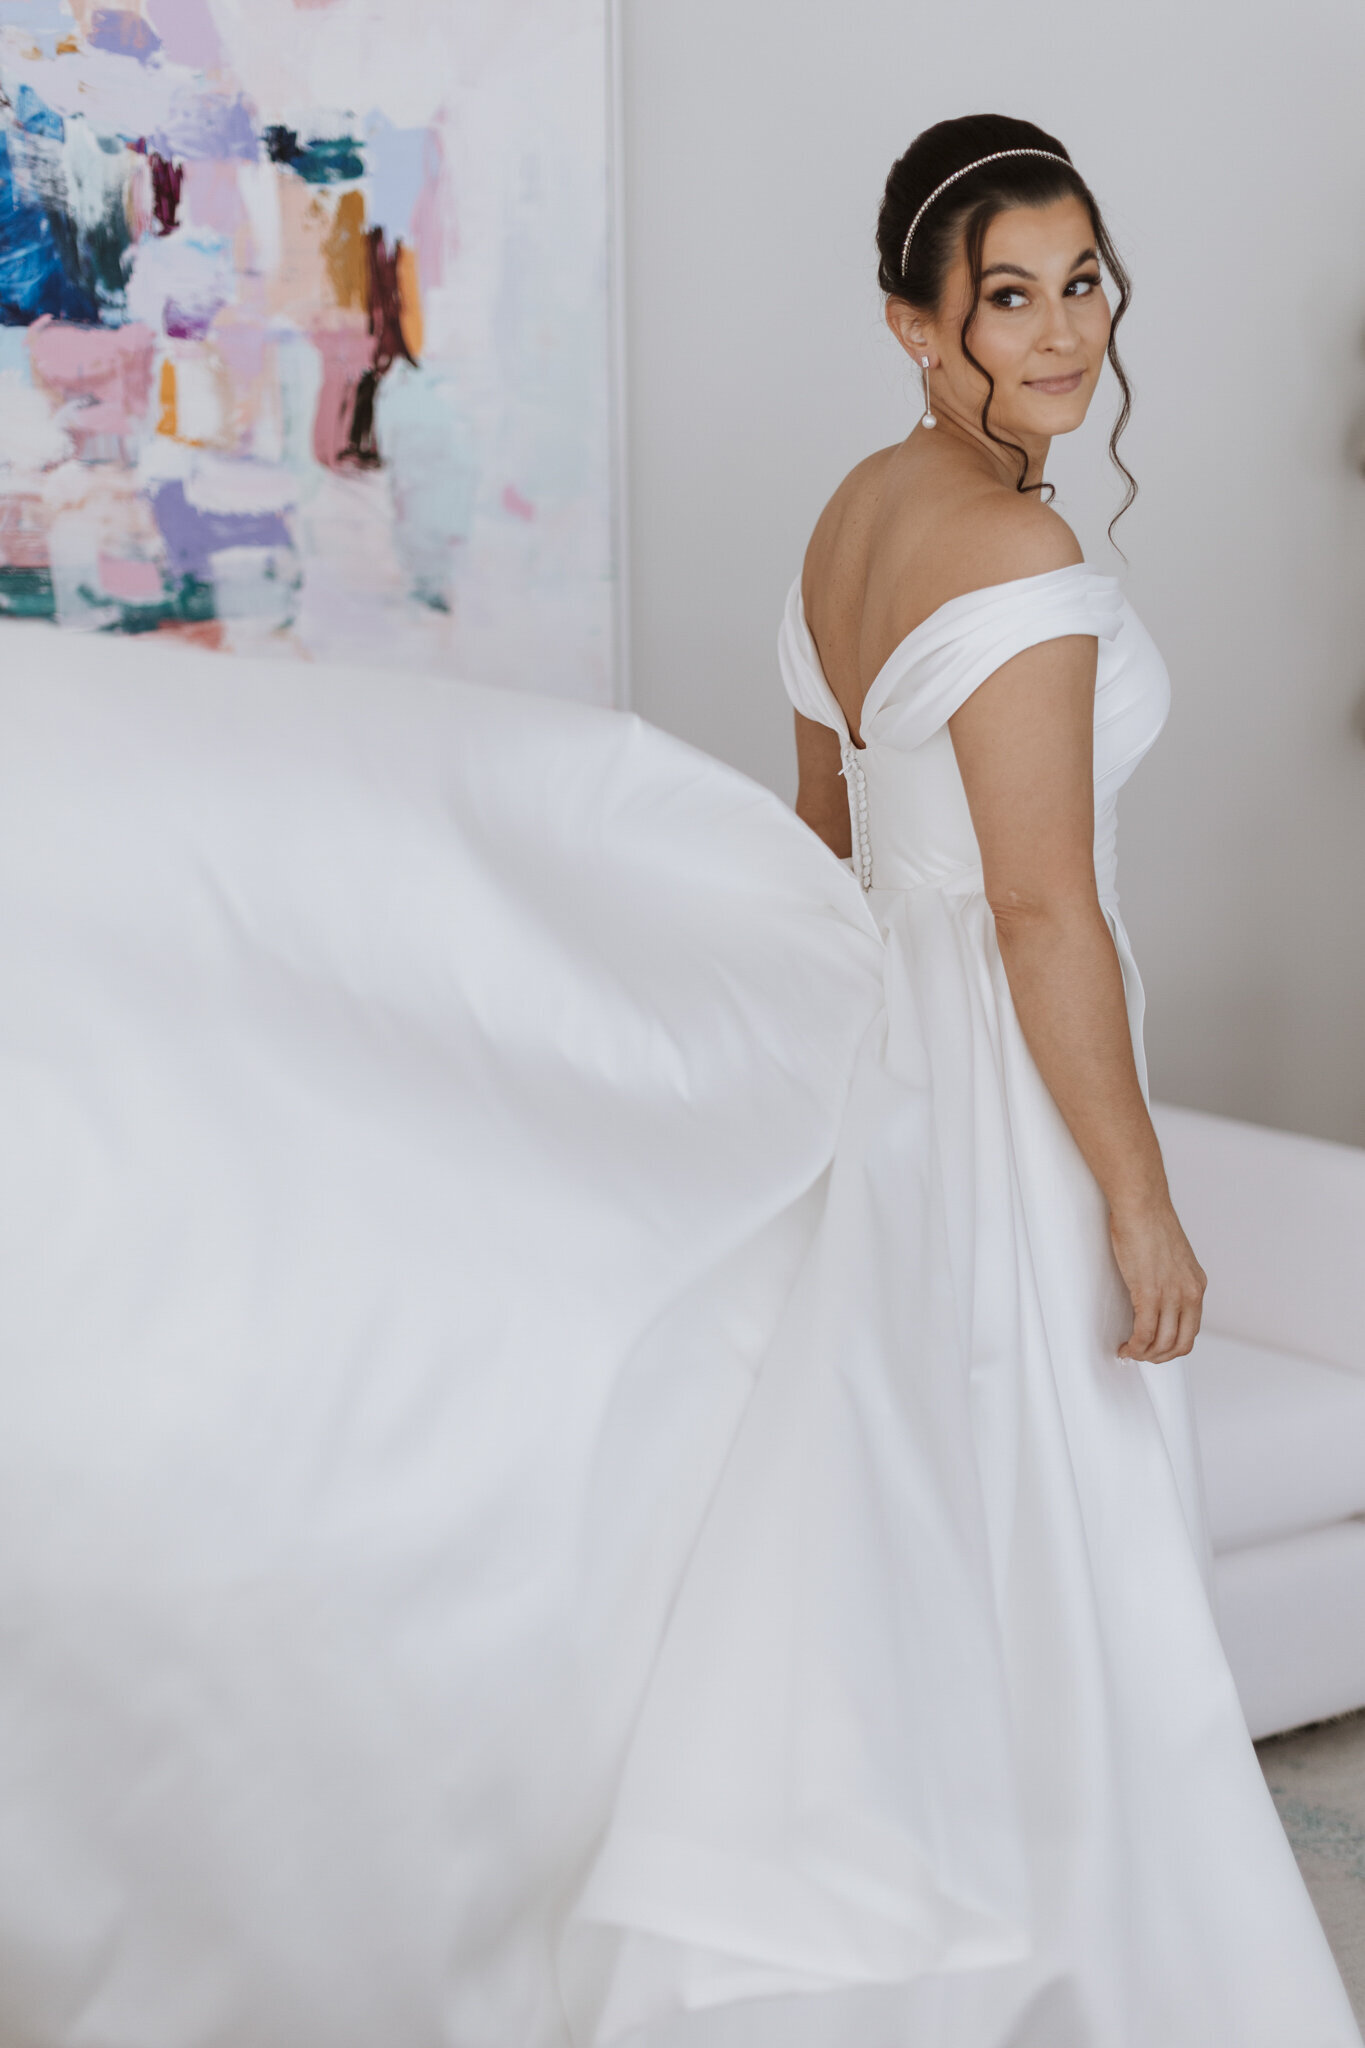 A bride standing in a white wedding dress by melbourne wedding photographer Ada and Ivy